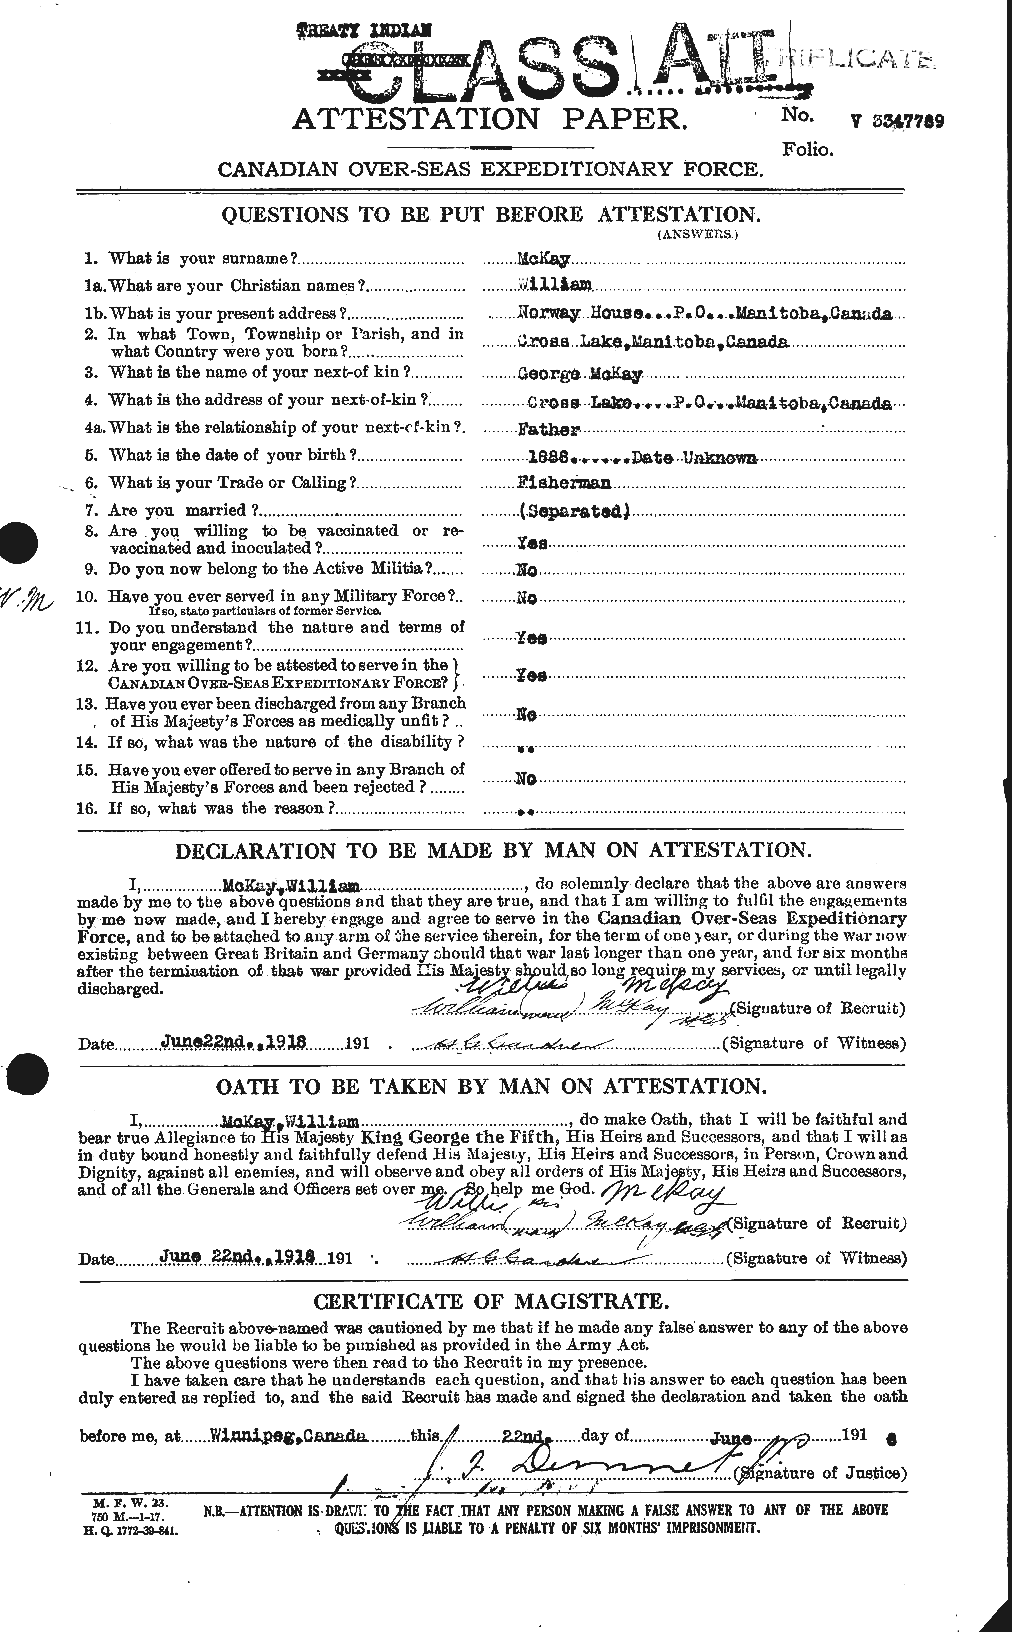 Personnel Records of the First World War - CEF 530258a